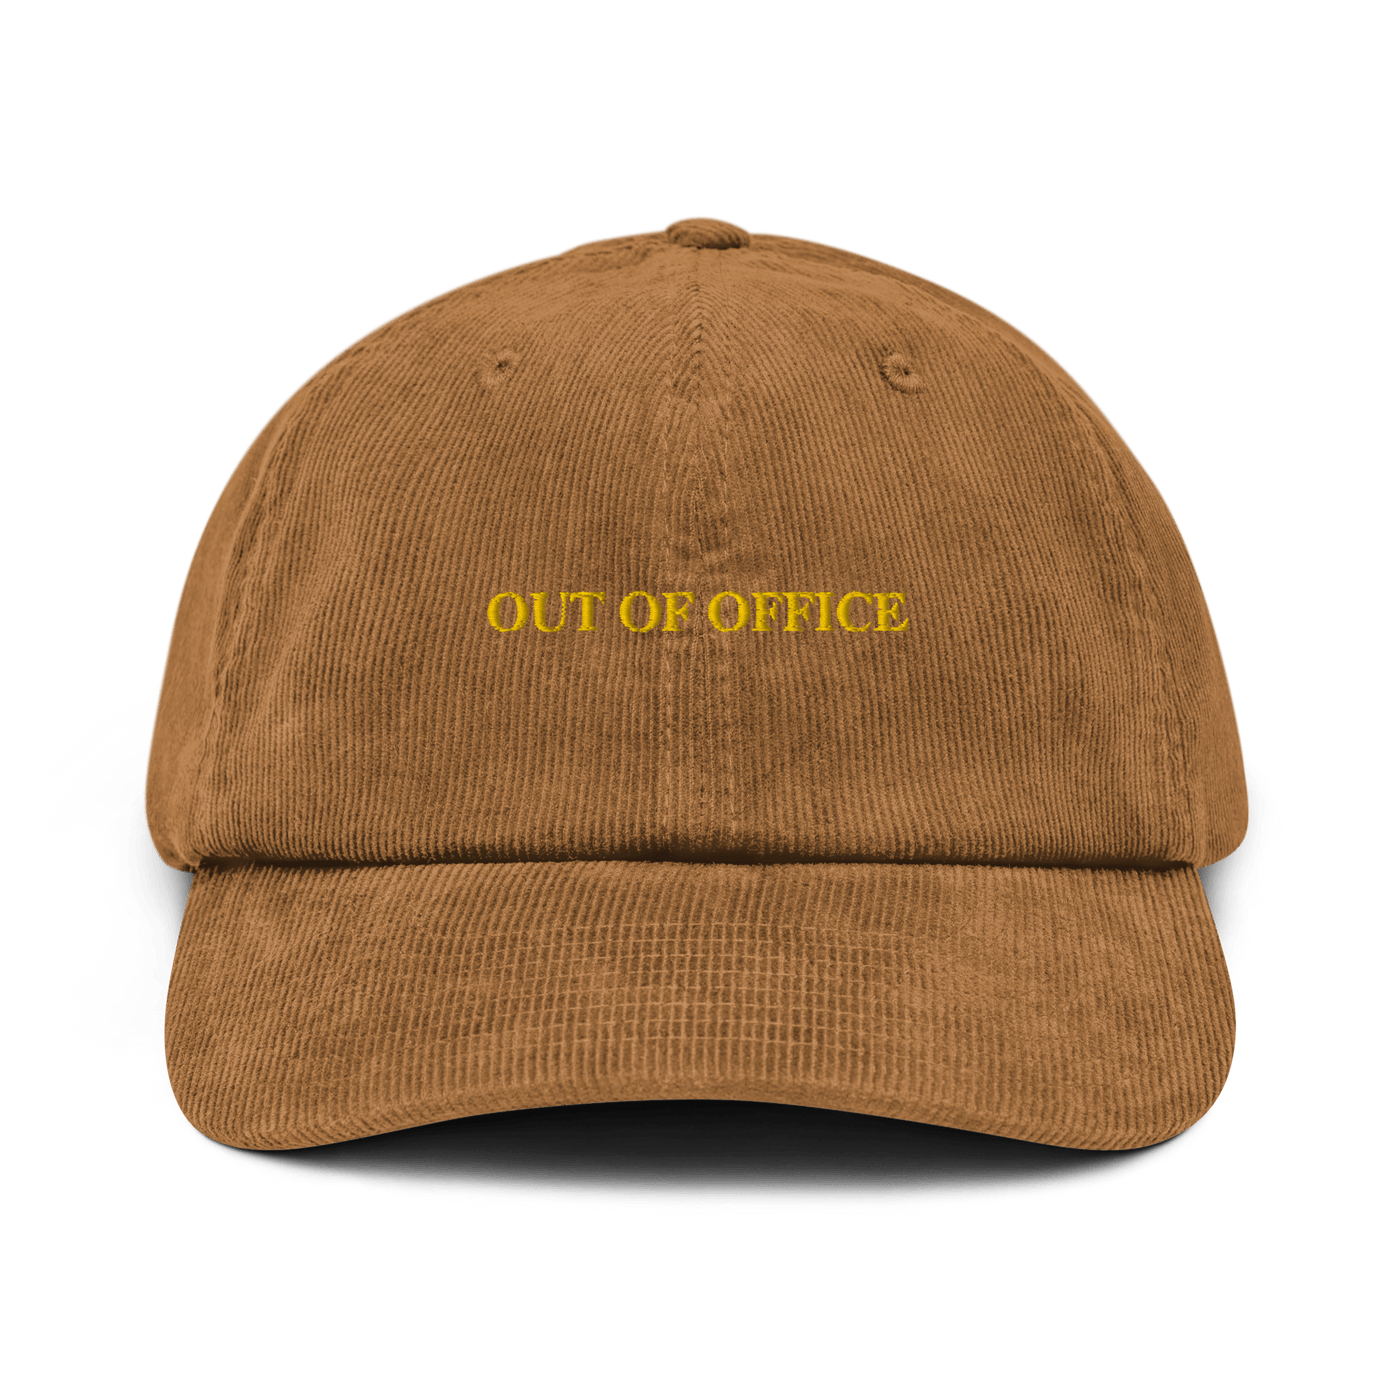 OUT OF OFFICE Corduroy hat - Camel - - Just Another Cap Store